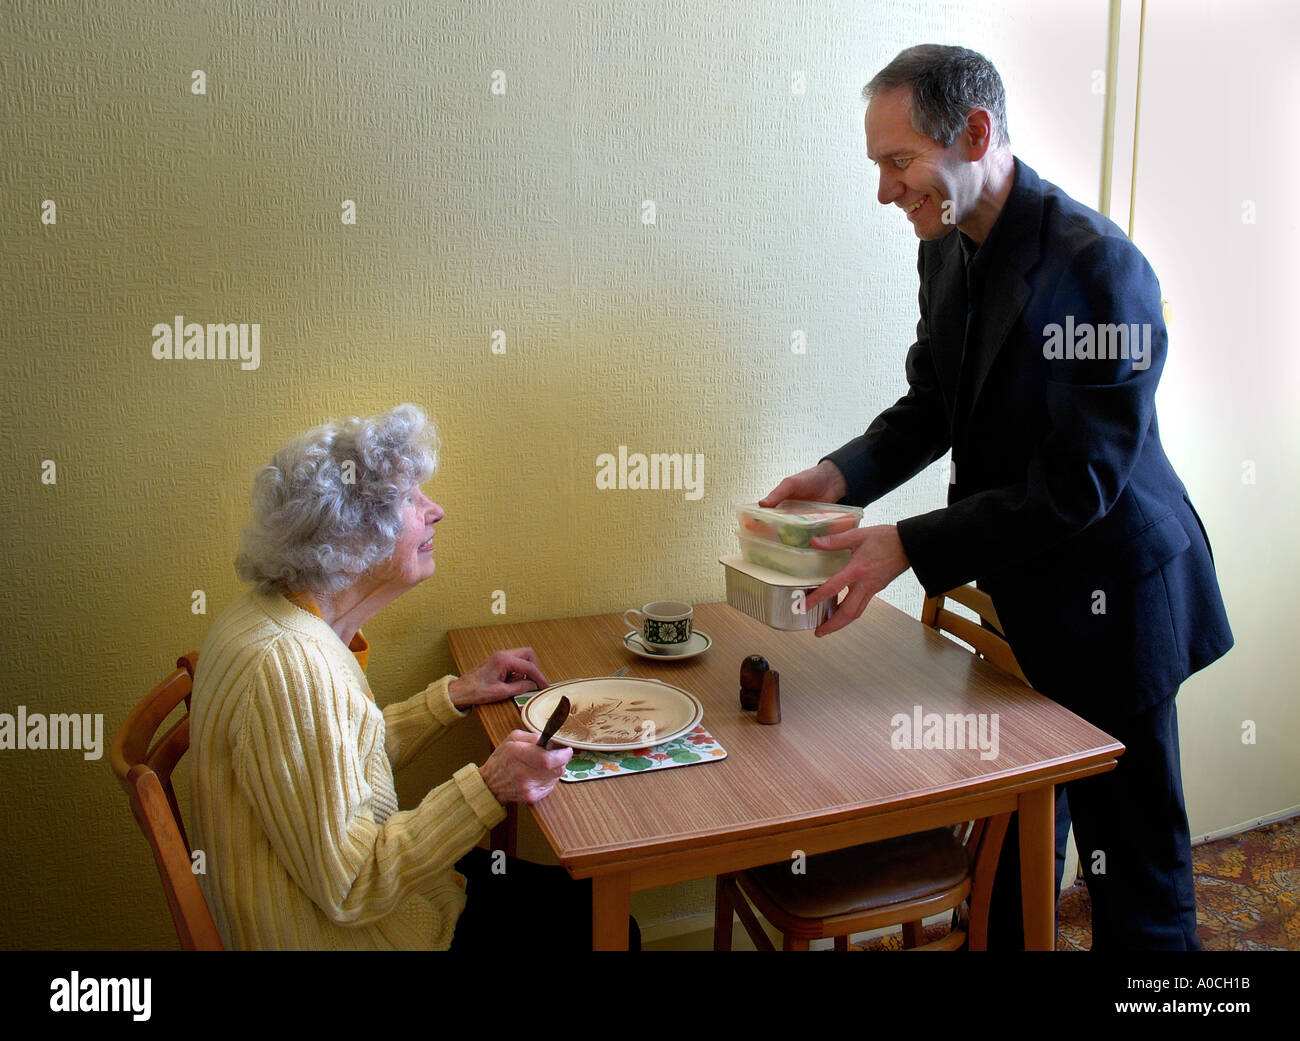 man giving elderly woman prepackaged meal Meals on wheels service Stock Photo